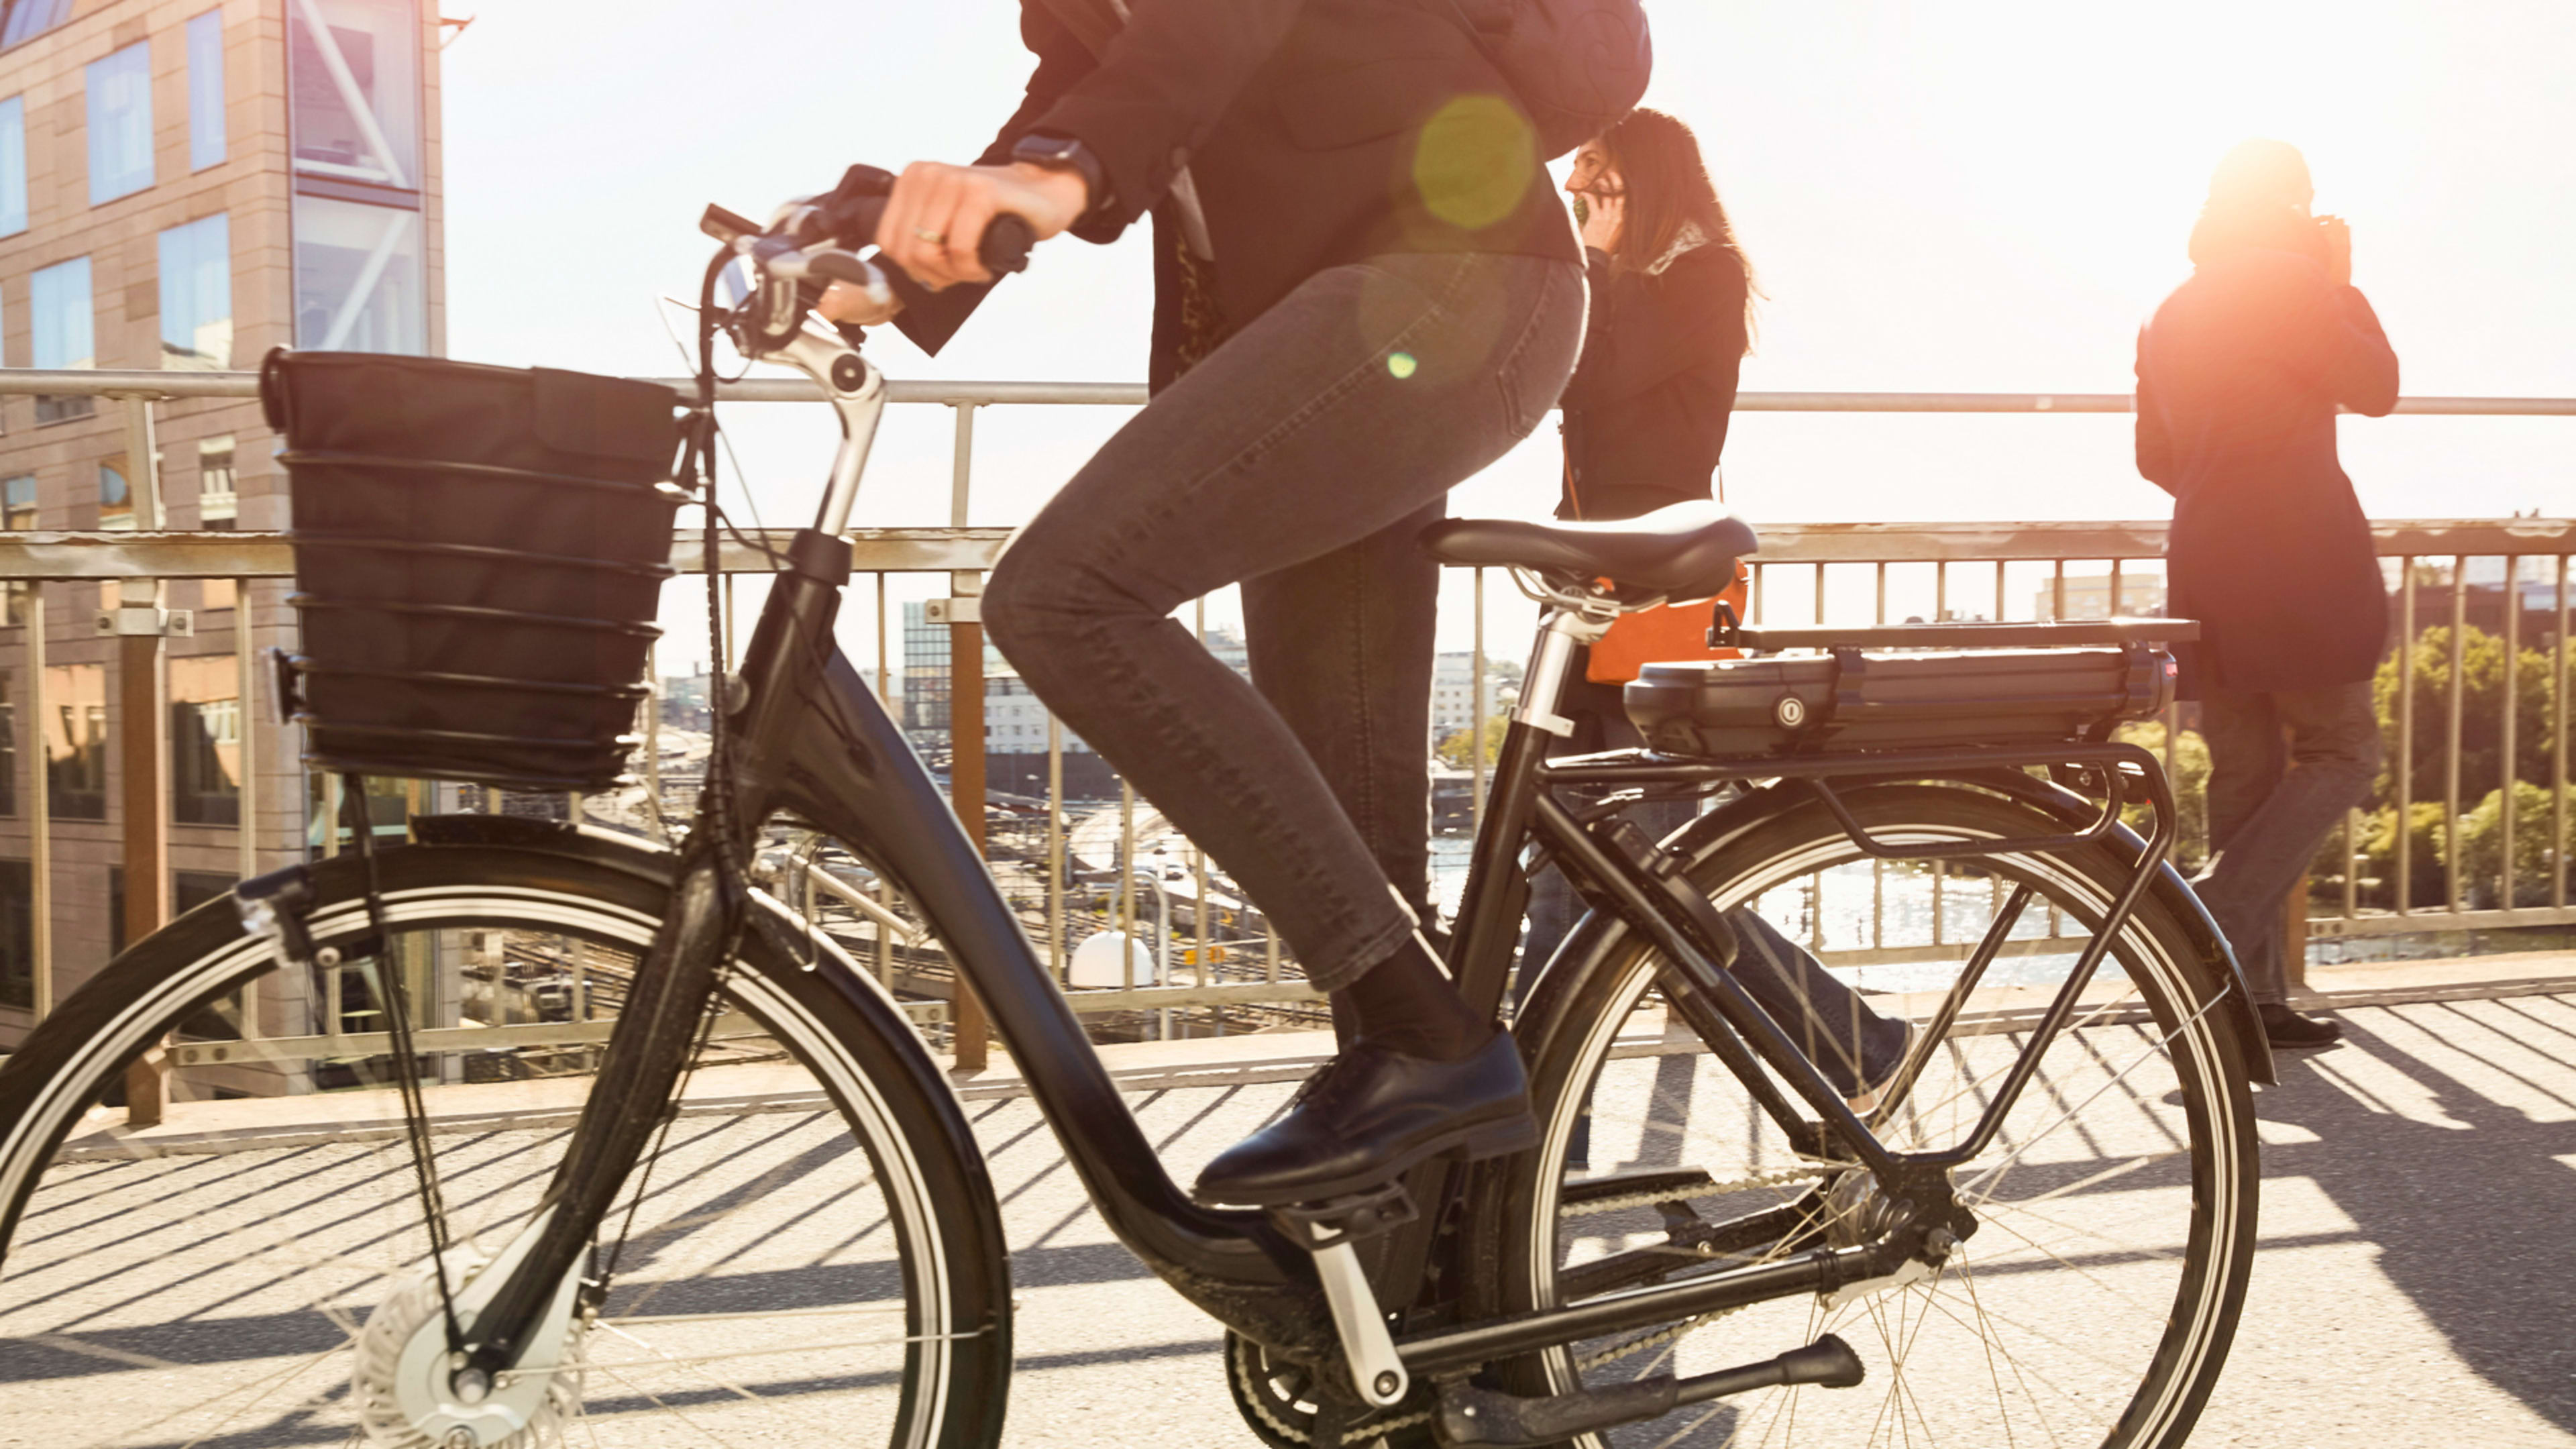 Would you go back to the office if your company provided an e-bike?